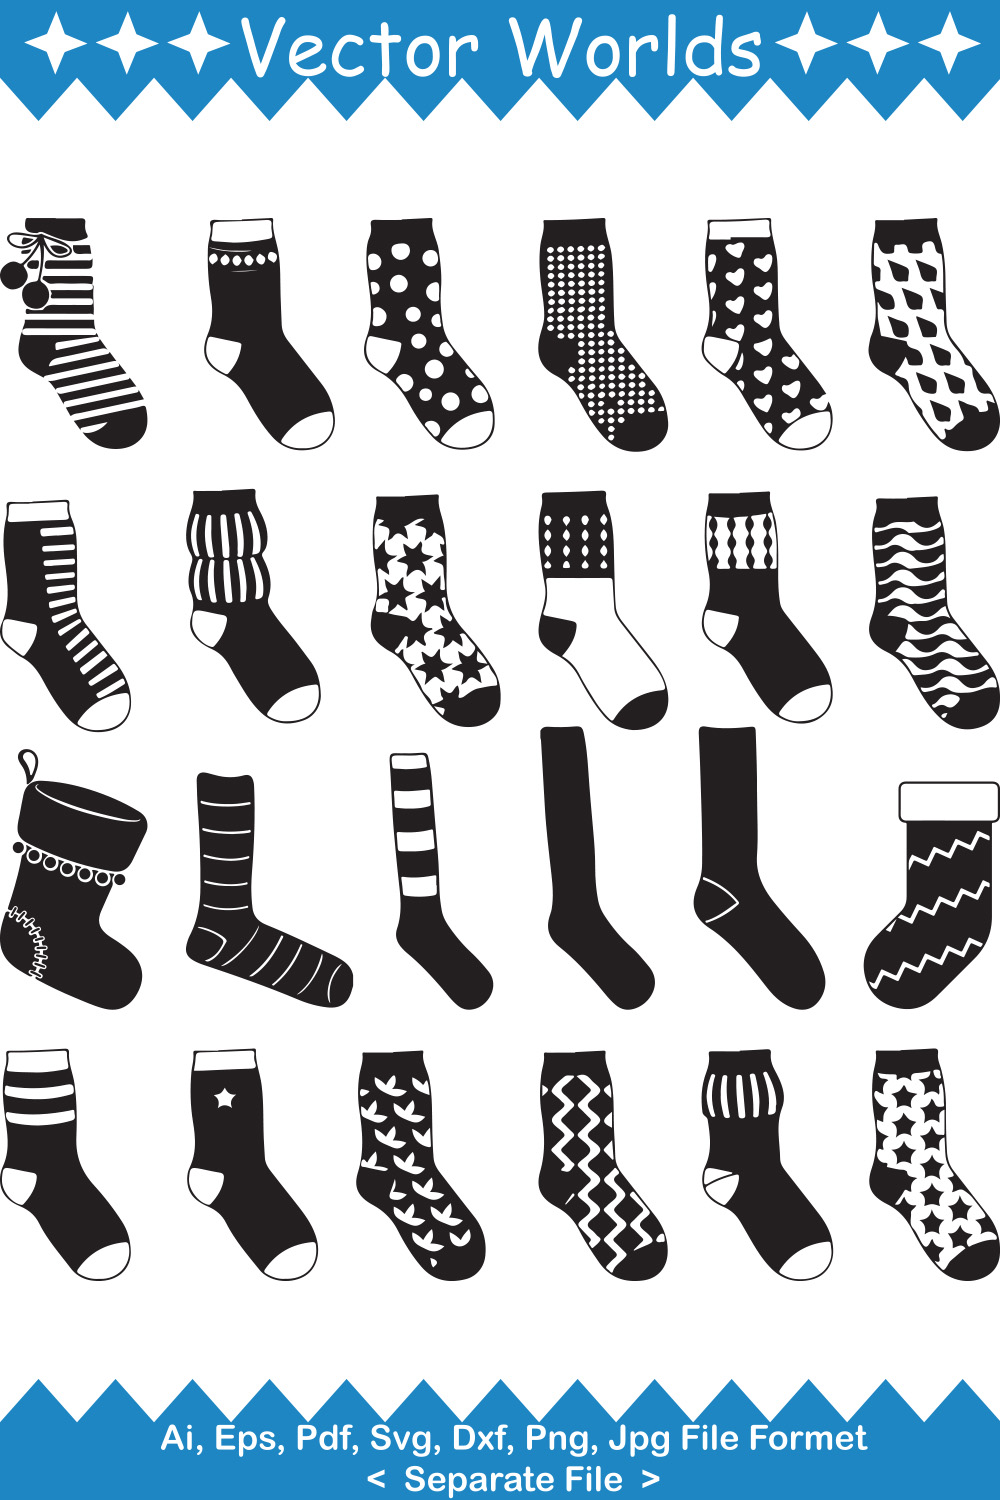 Collection of vector exquisite images of sock silhouettes.